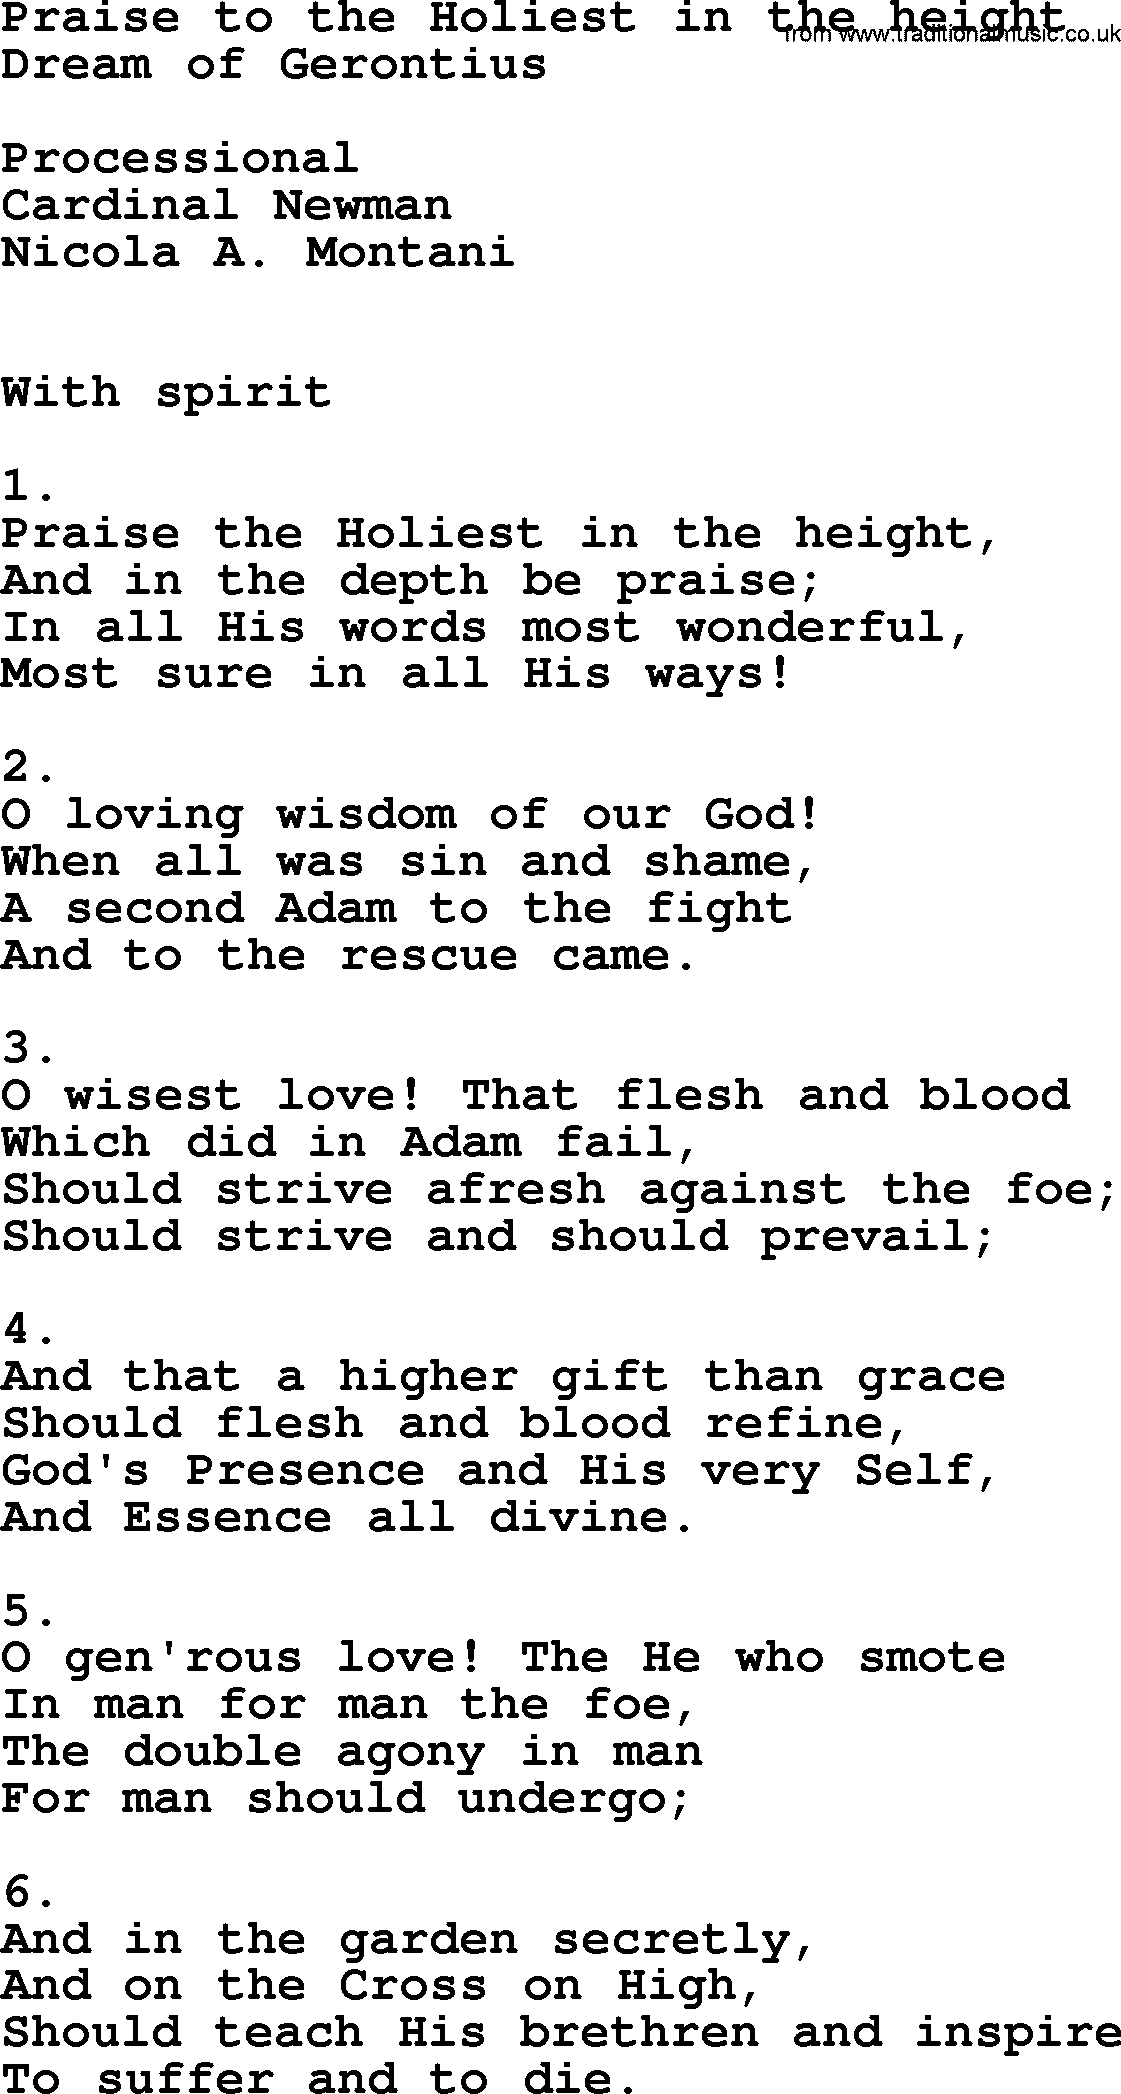 Catholic Hymn: Praise To The Holiest In The Height lyrics with PDF